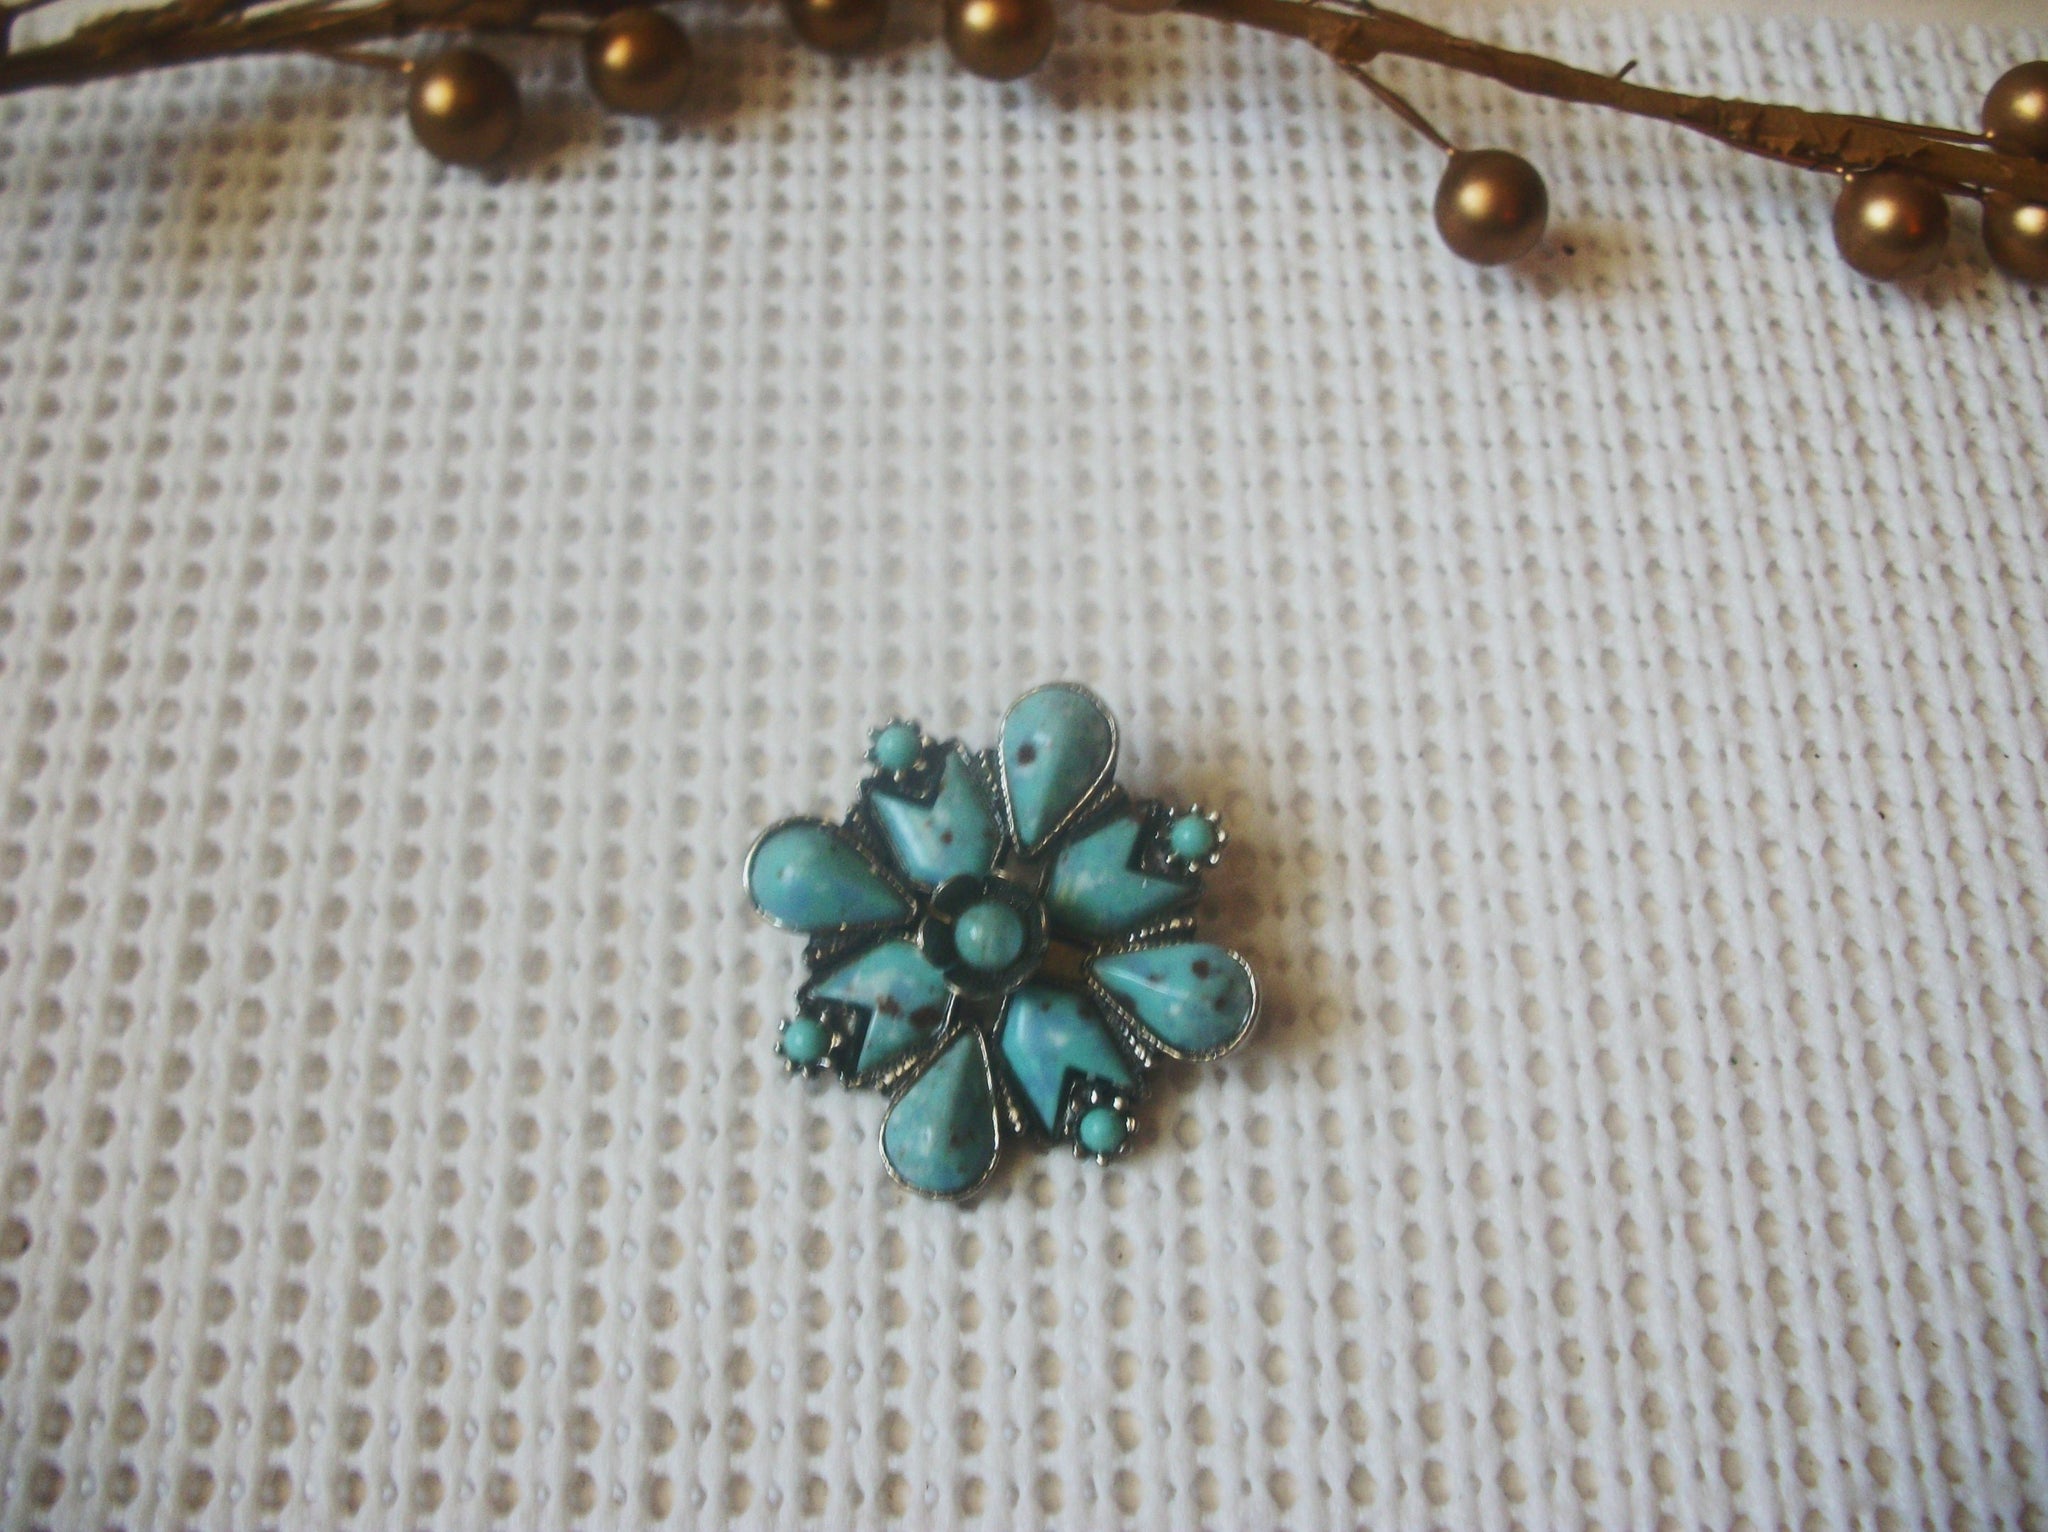 Vintage Brooch Pin, Southwestern Turquoise Stone Floral 52017